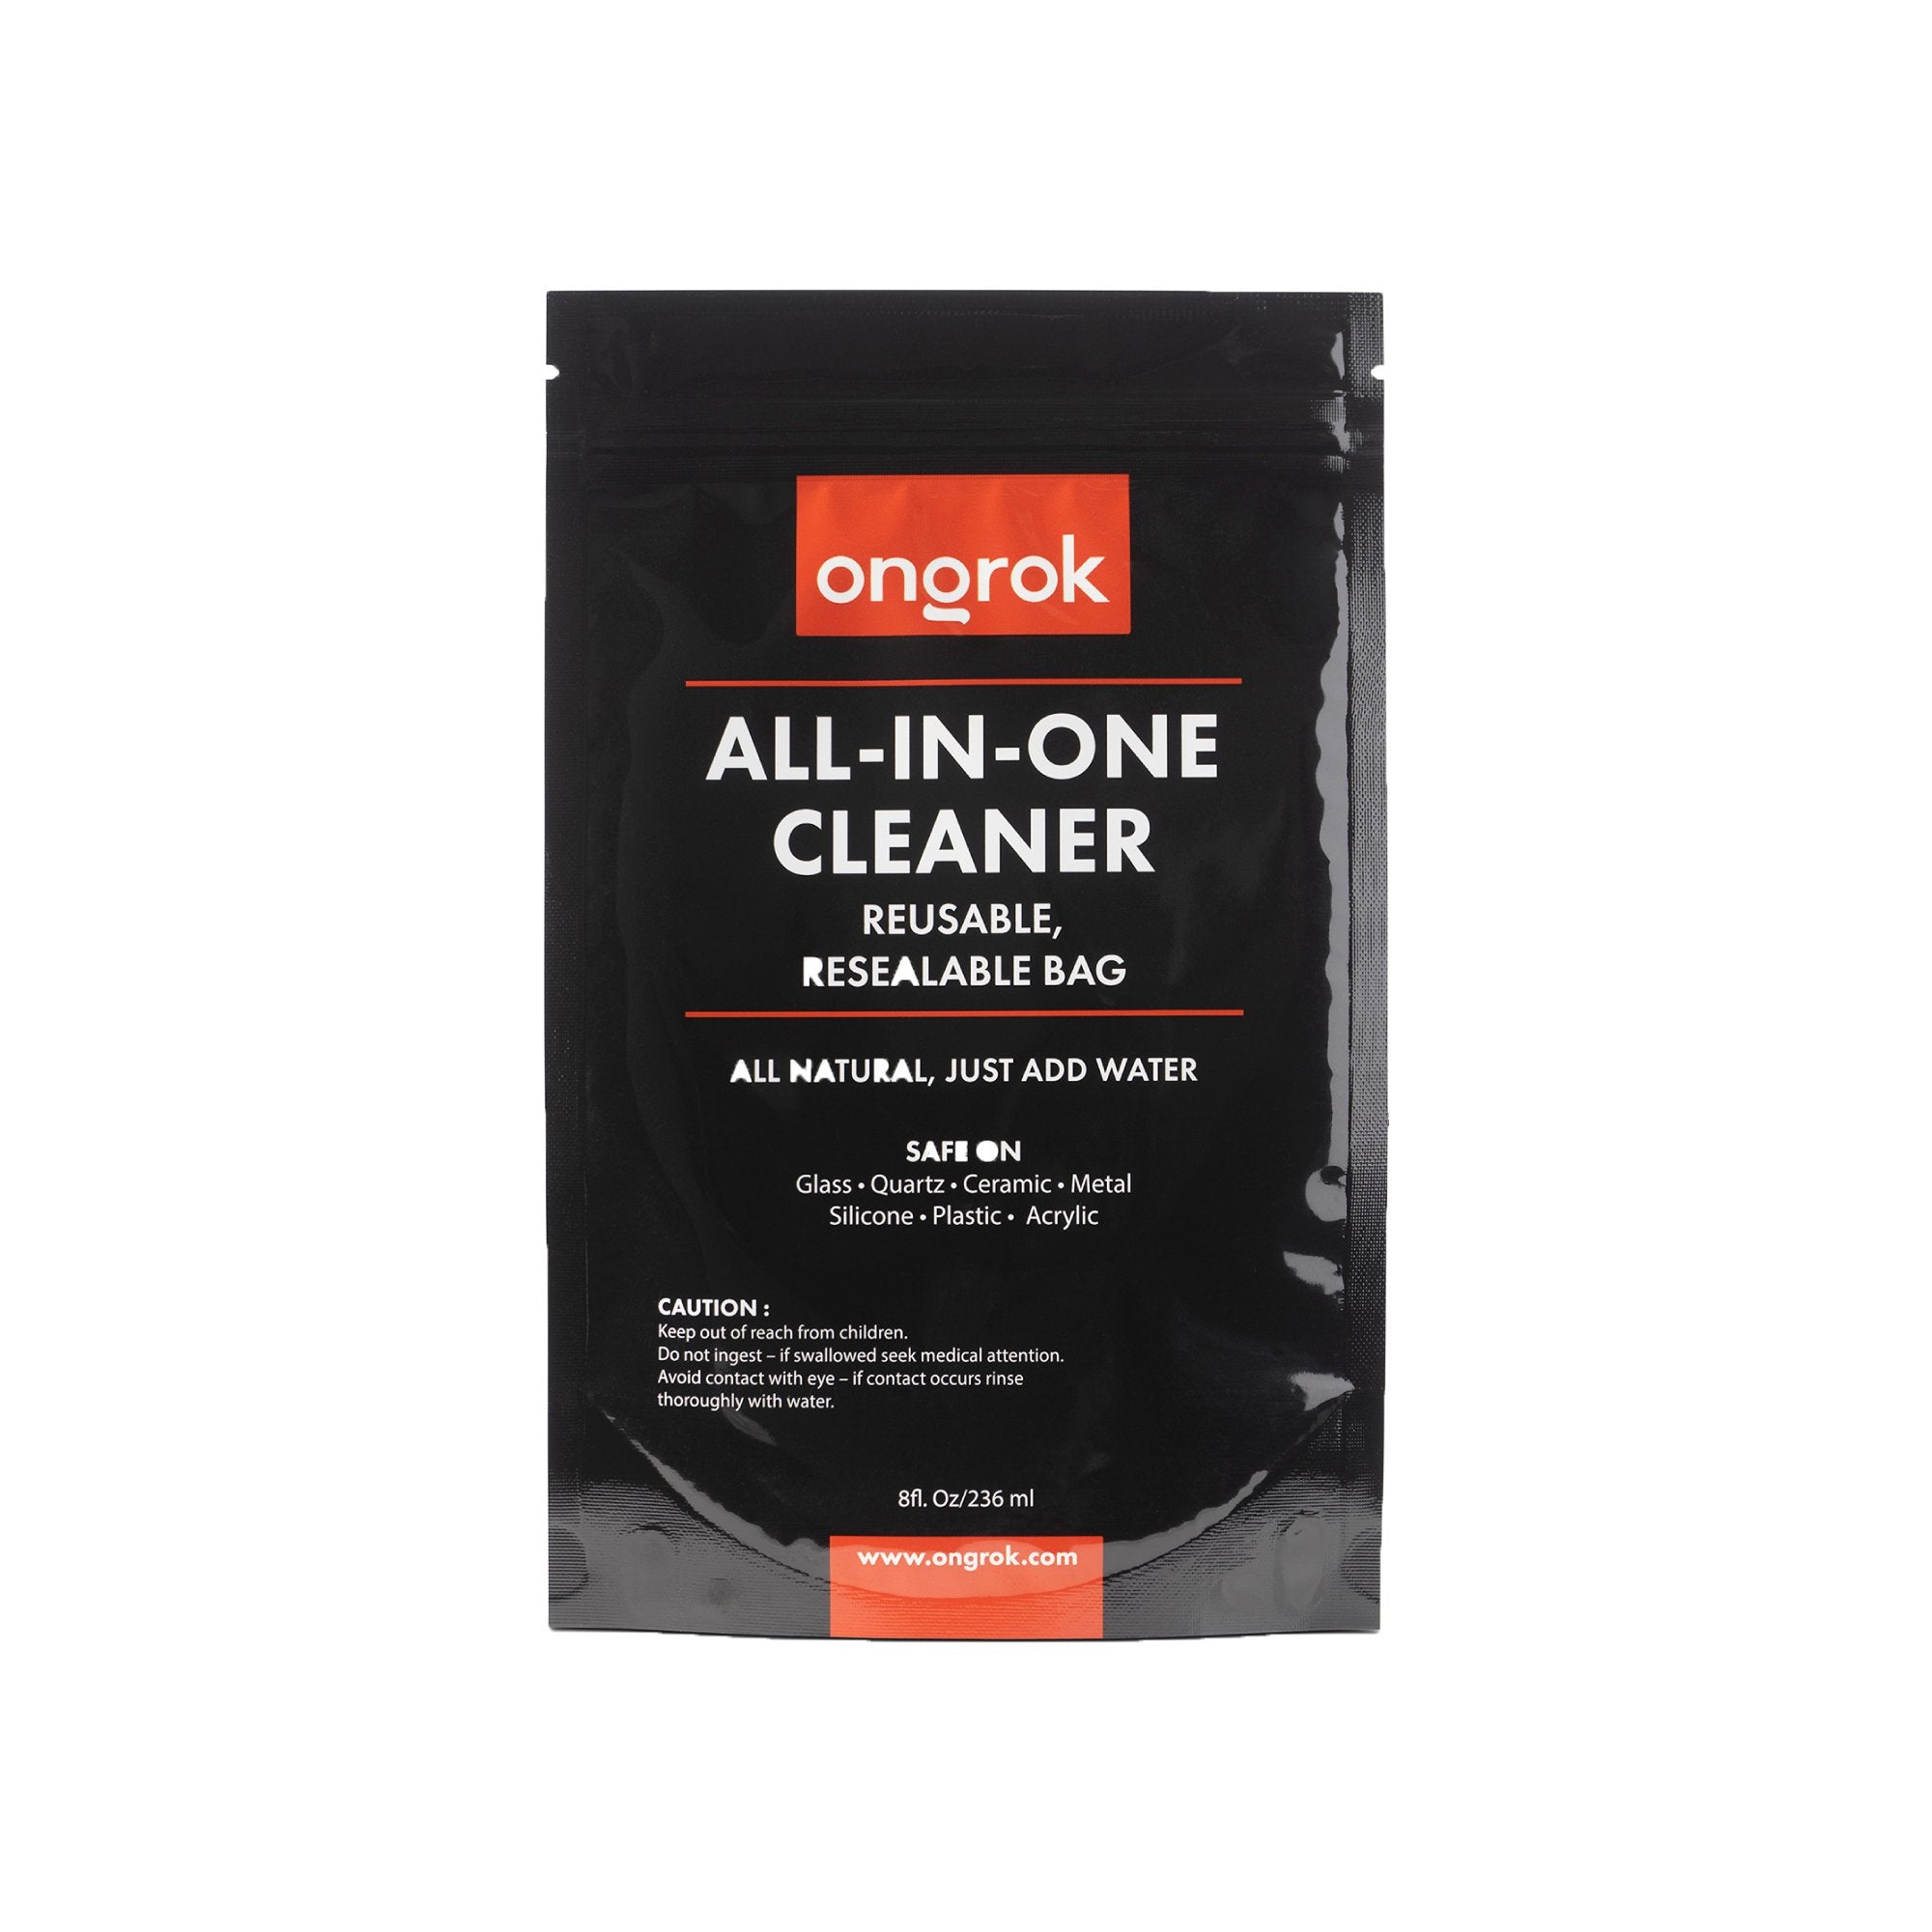 All-in-One Cleaner